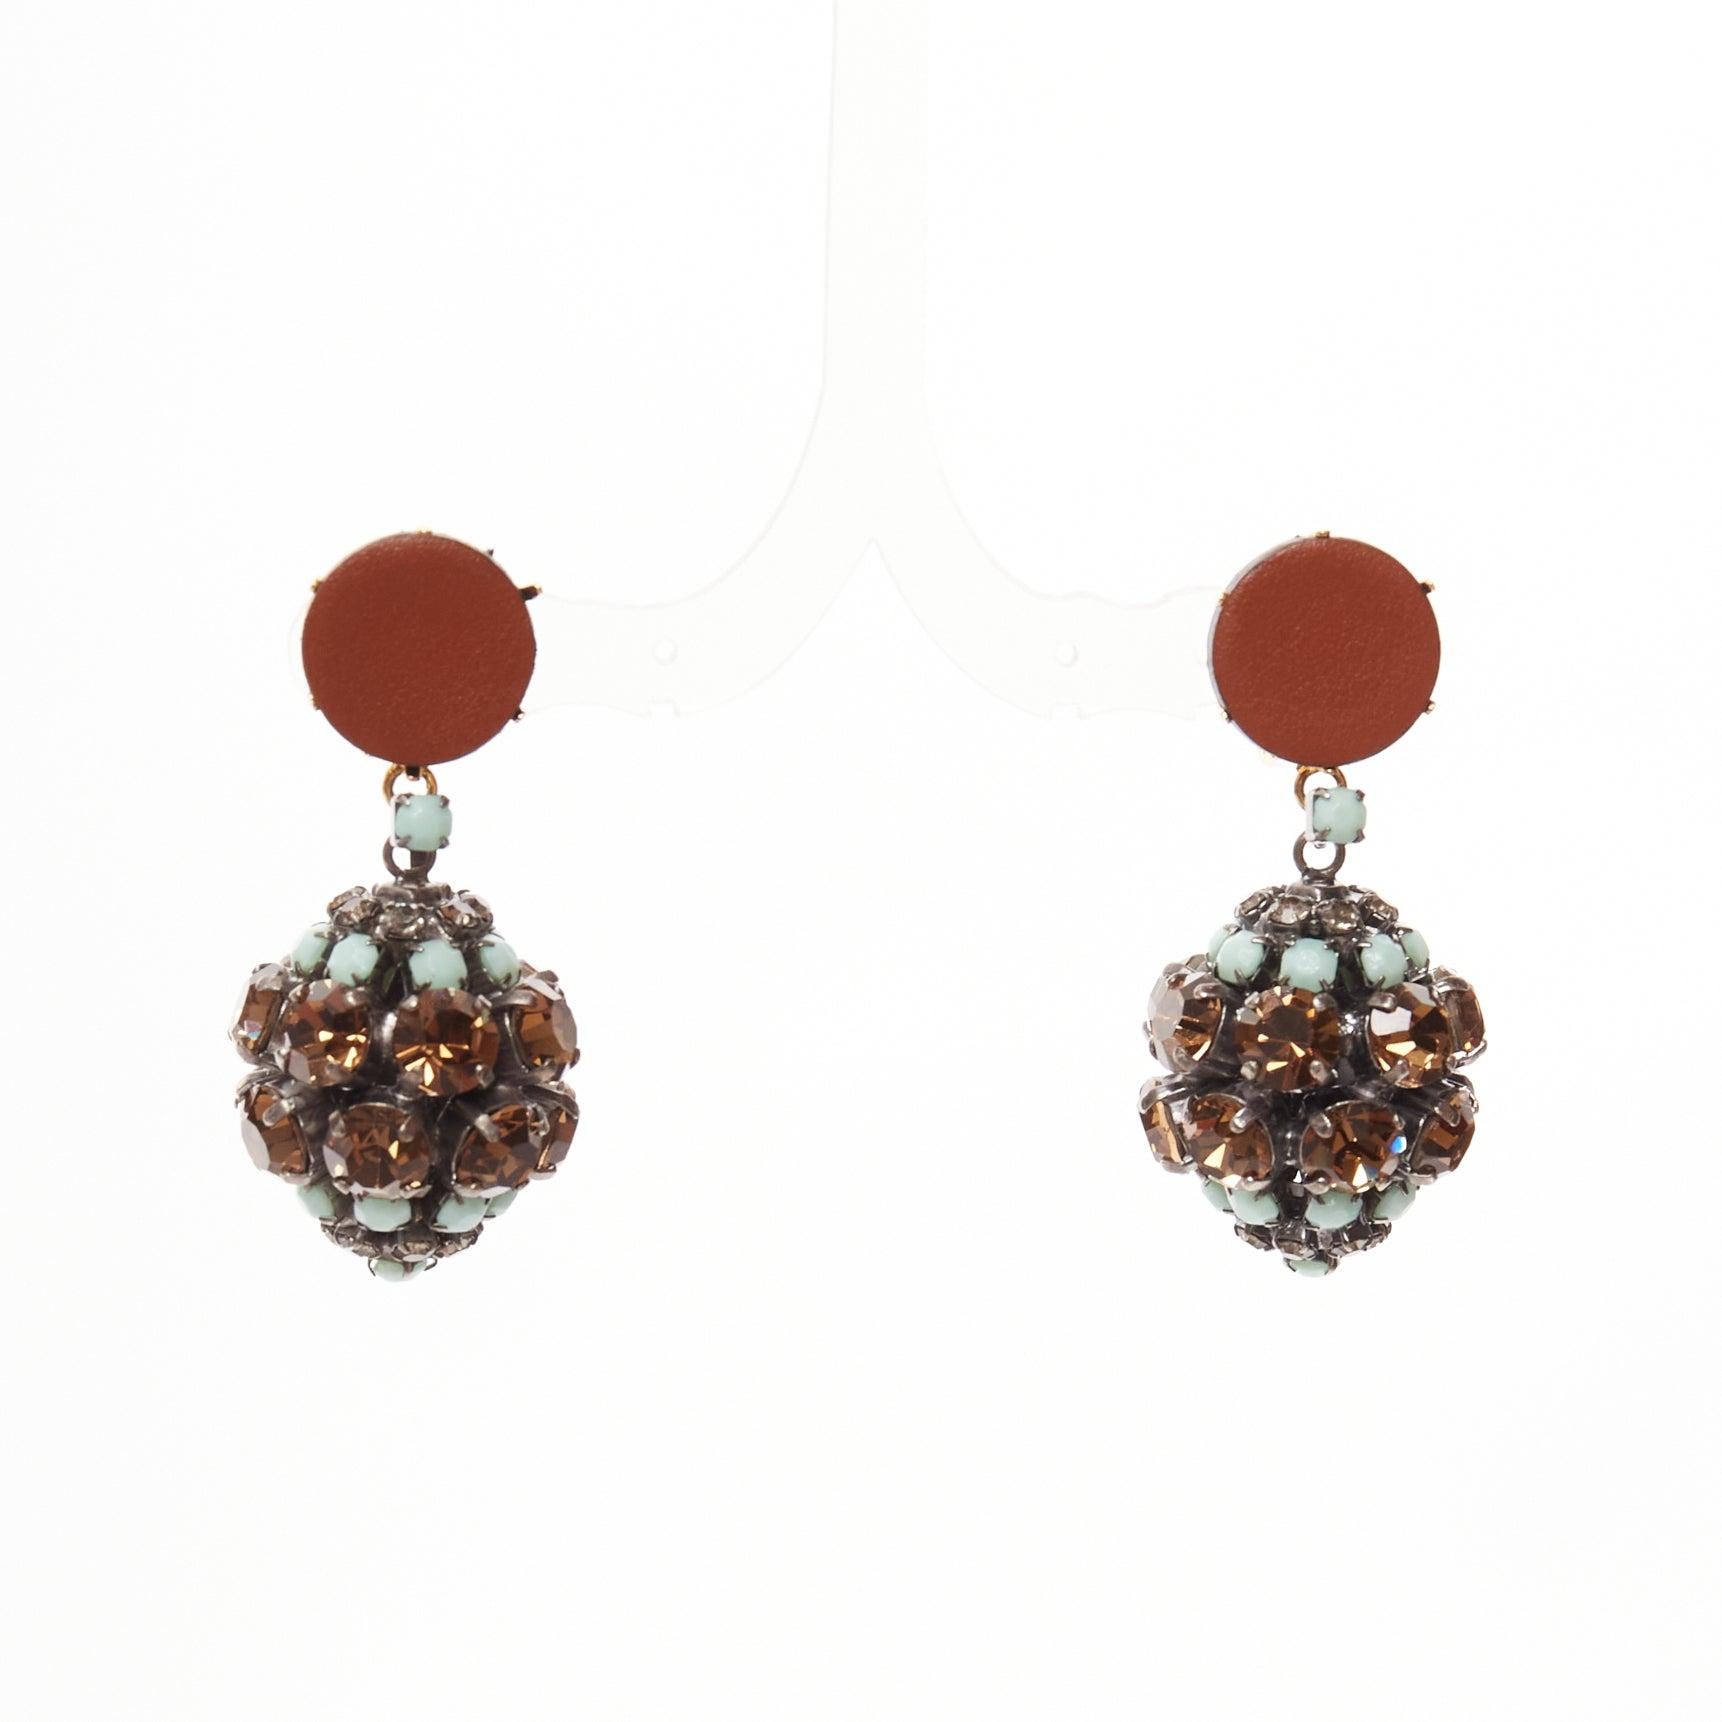 MARNI blue crystal drop ball brown leather dangling clip on earrings
Reference: AAWC/A01228
Brand: Marni
Material: Metal, Leather
Color: Brown, Blue
Pattern: Crystals
Closure: Clip On
Lining: Gold Metal
Made in: Italy

CONDITION:
Condition: